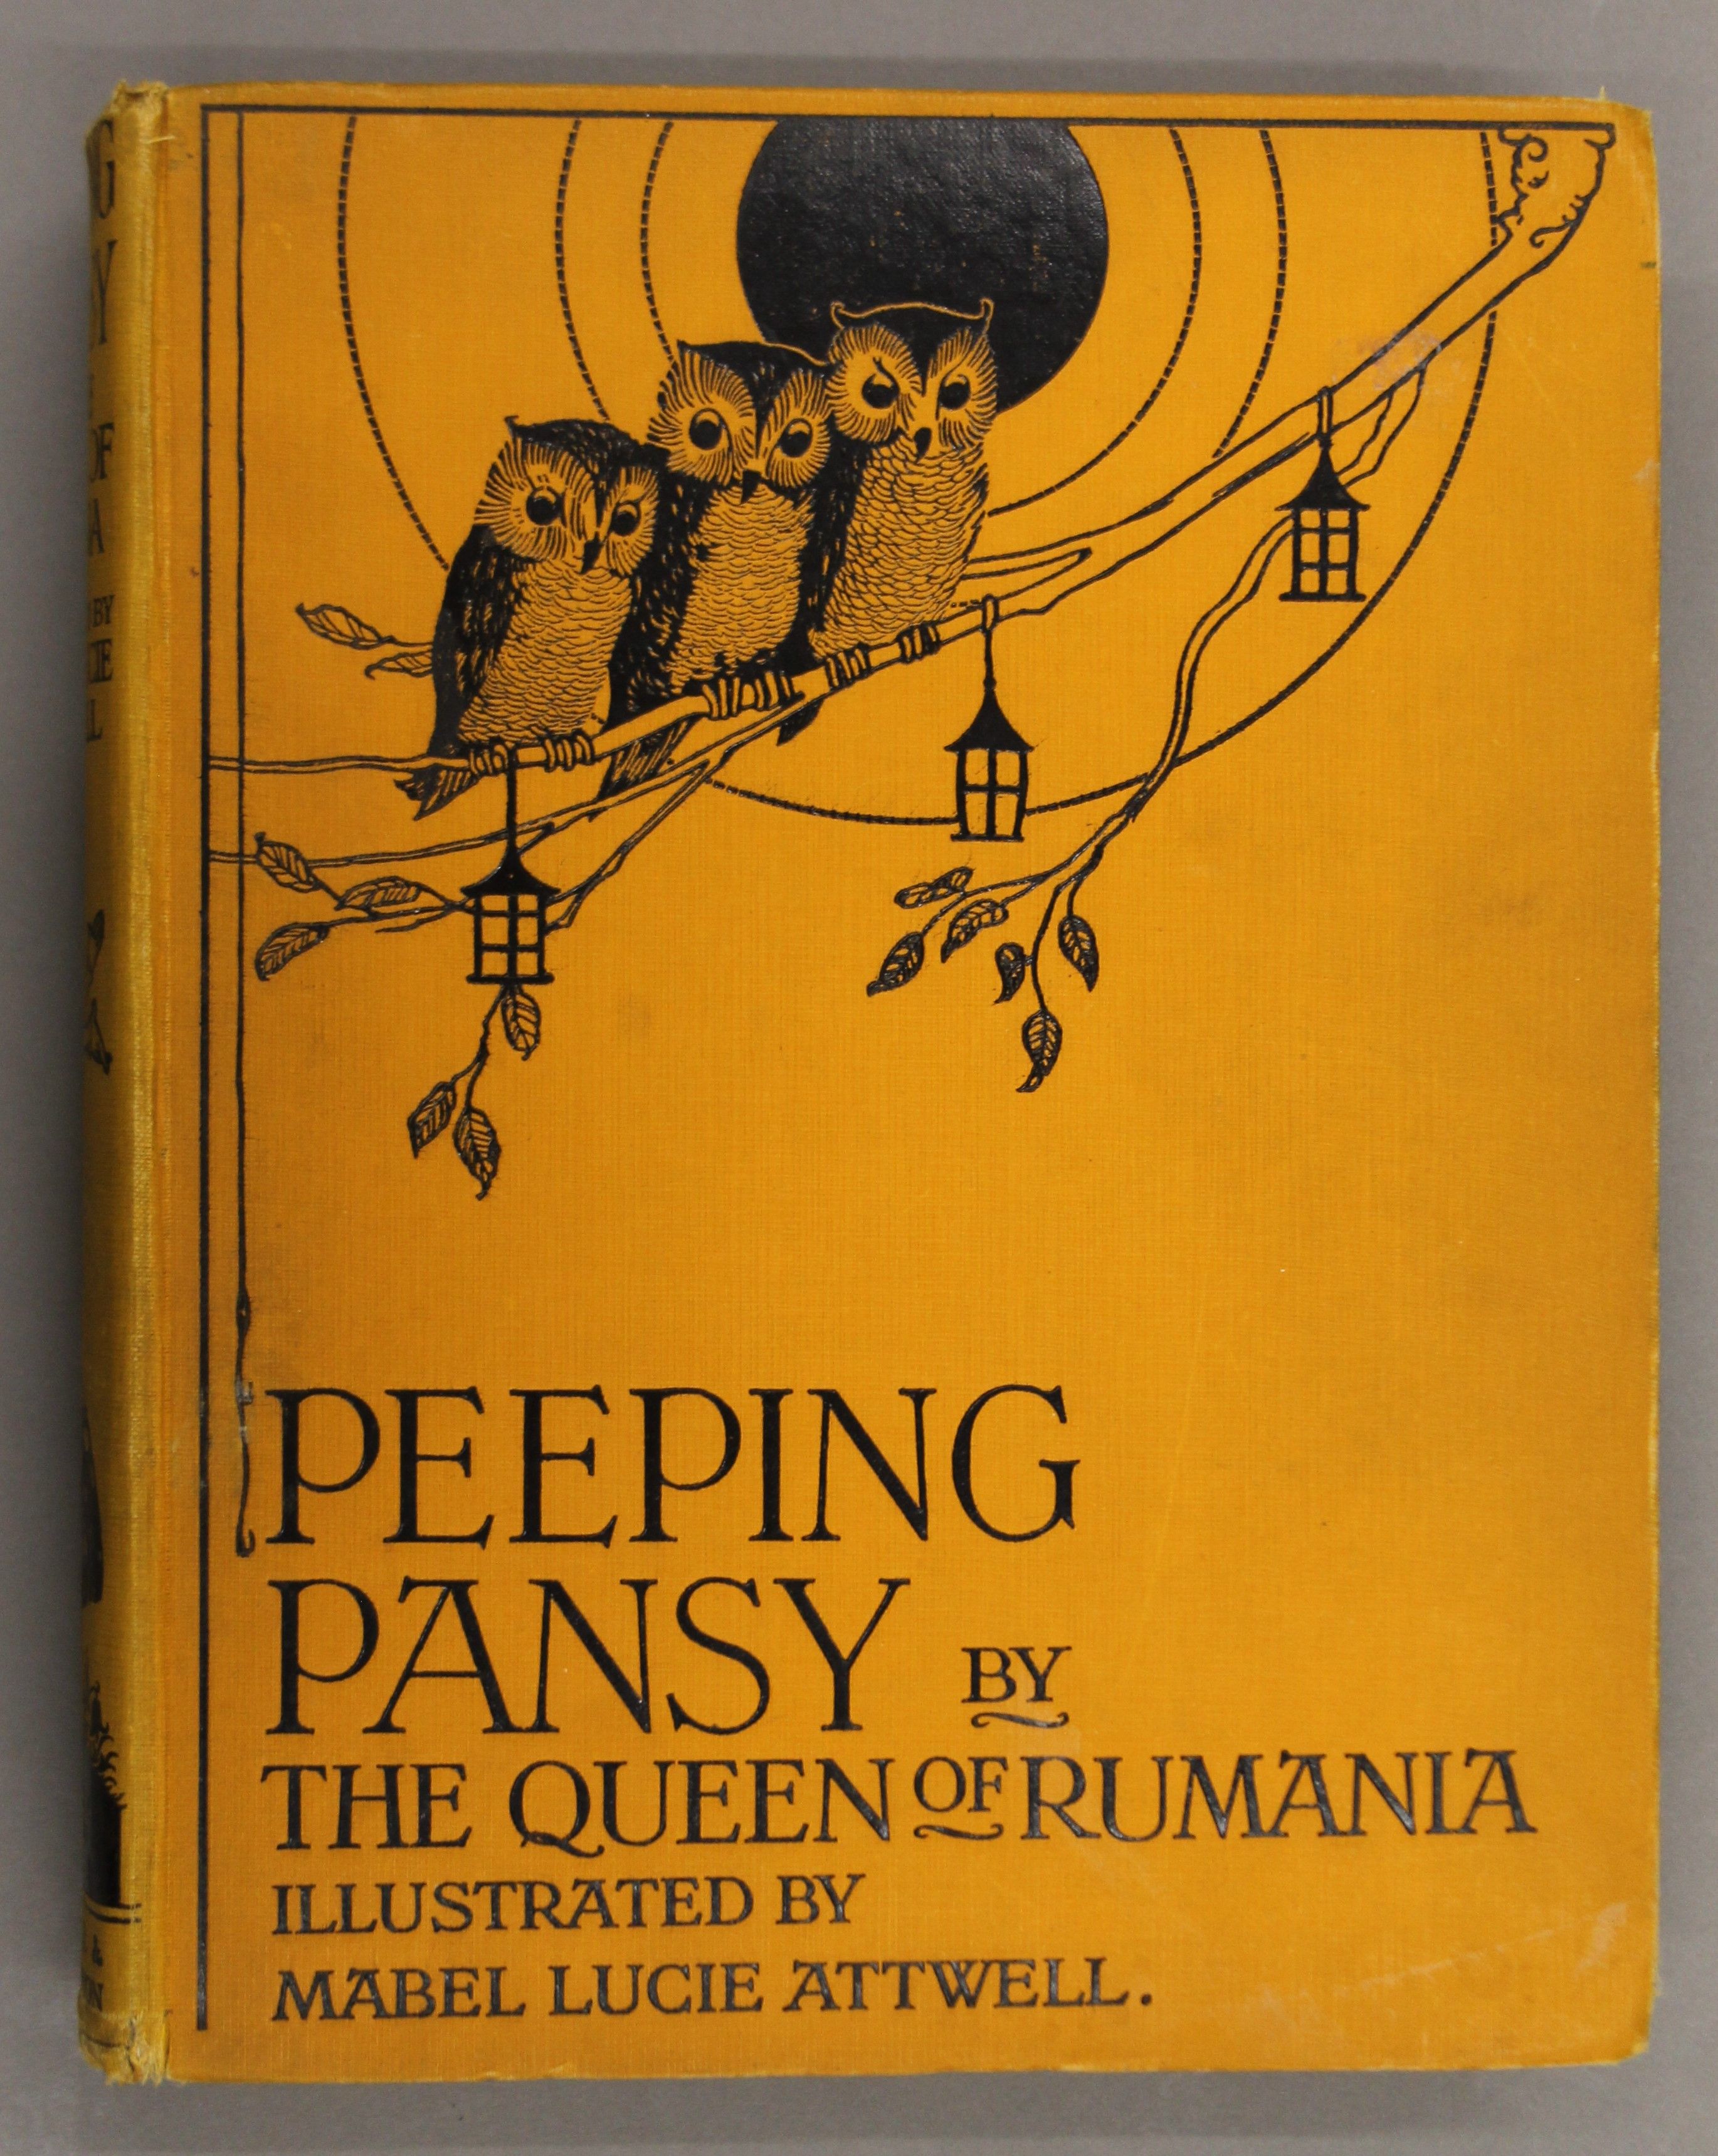 Peeping Pansy by Marie Queen of Romania illustrated by Mabel Lucie Attwell (circa 1919),